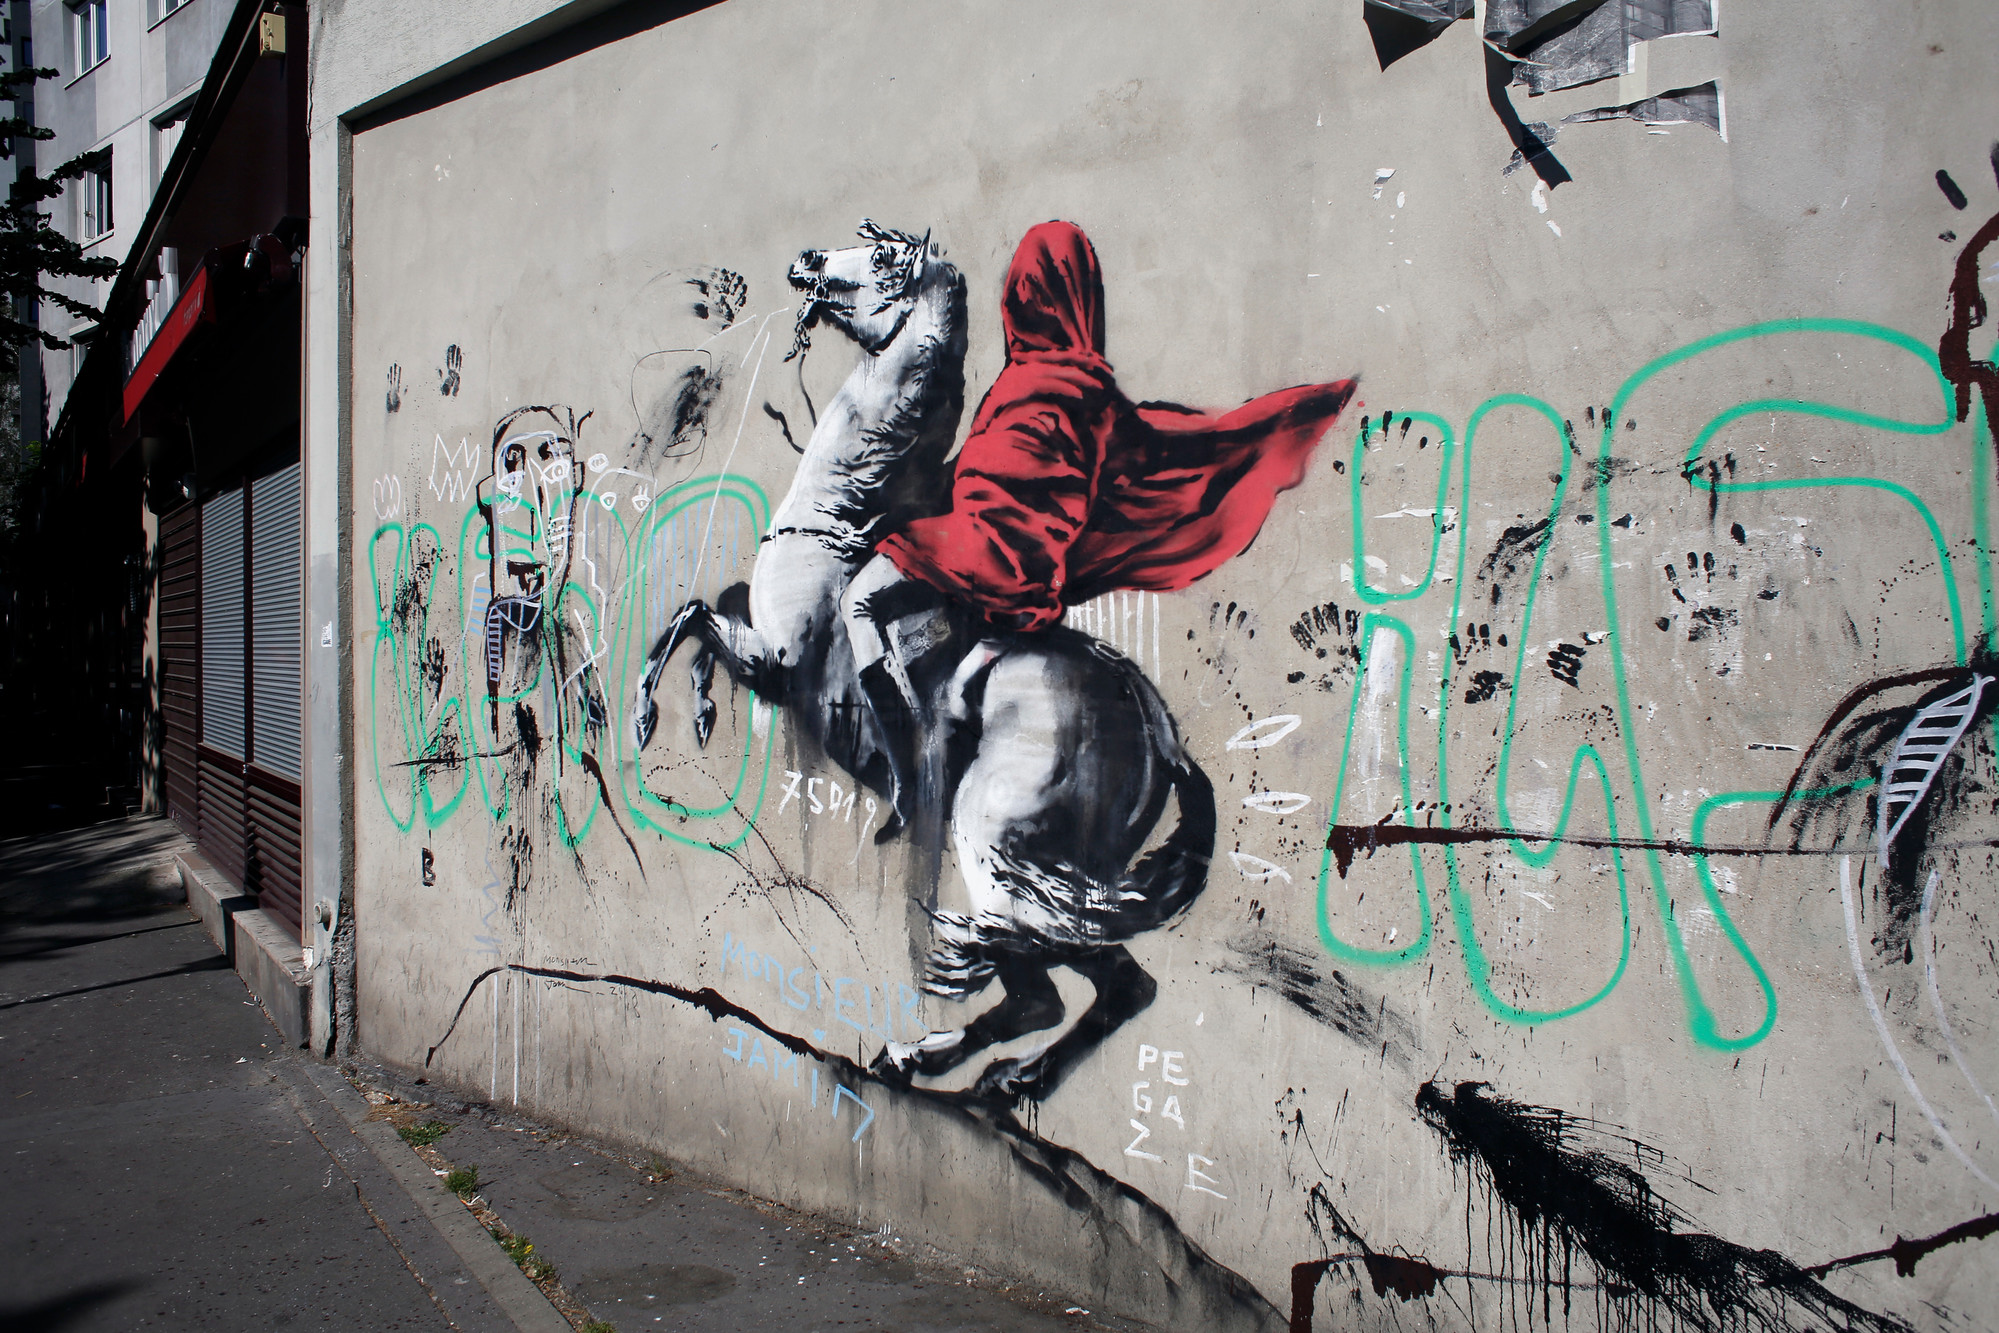 Paris splashed with works by street artist Banksy | The ...